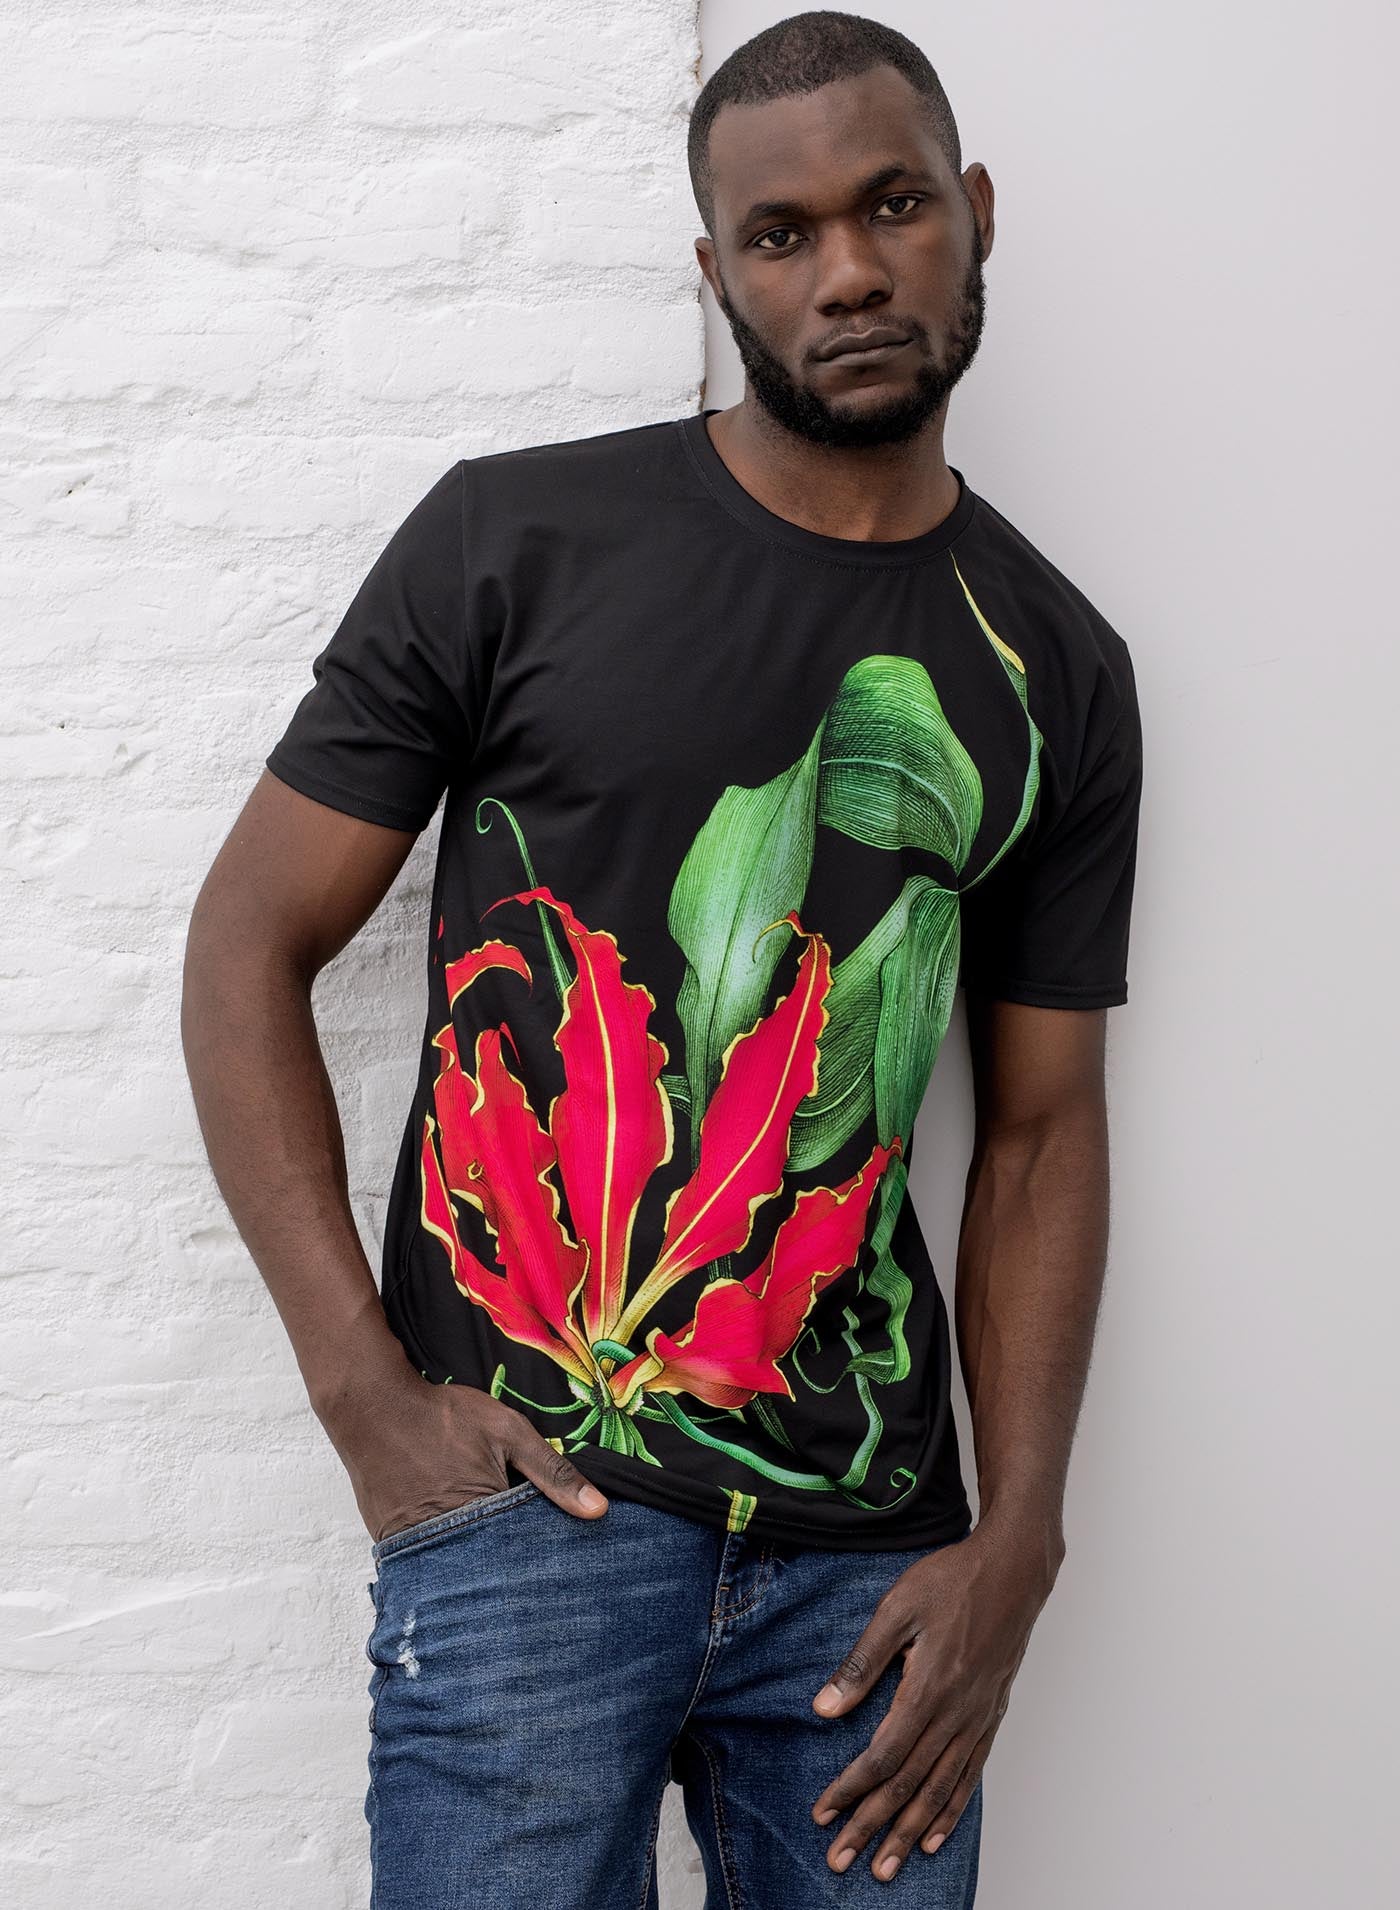 Man modeling an All over dye sublimation t-shirt featuring the poisonous flower Fire Lily. Illustrated by G.M. Meave.